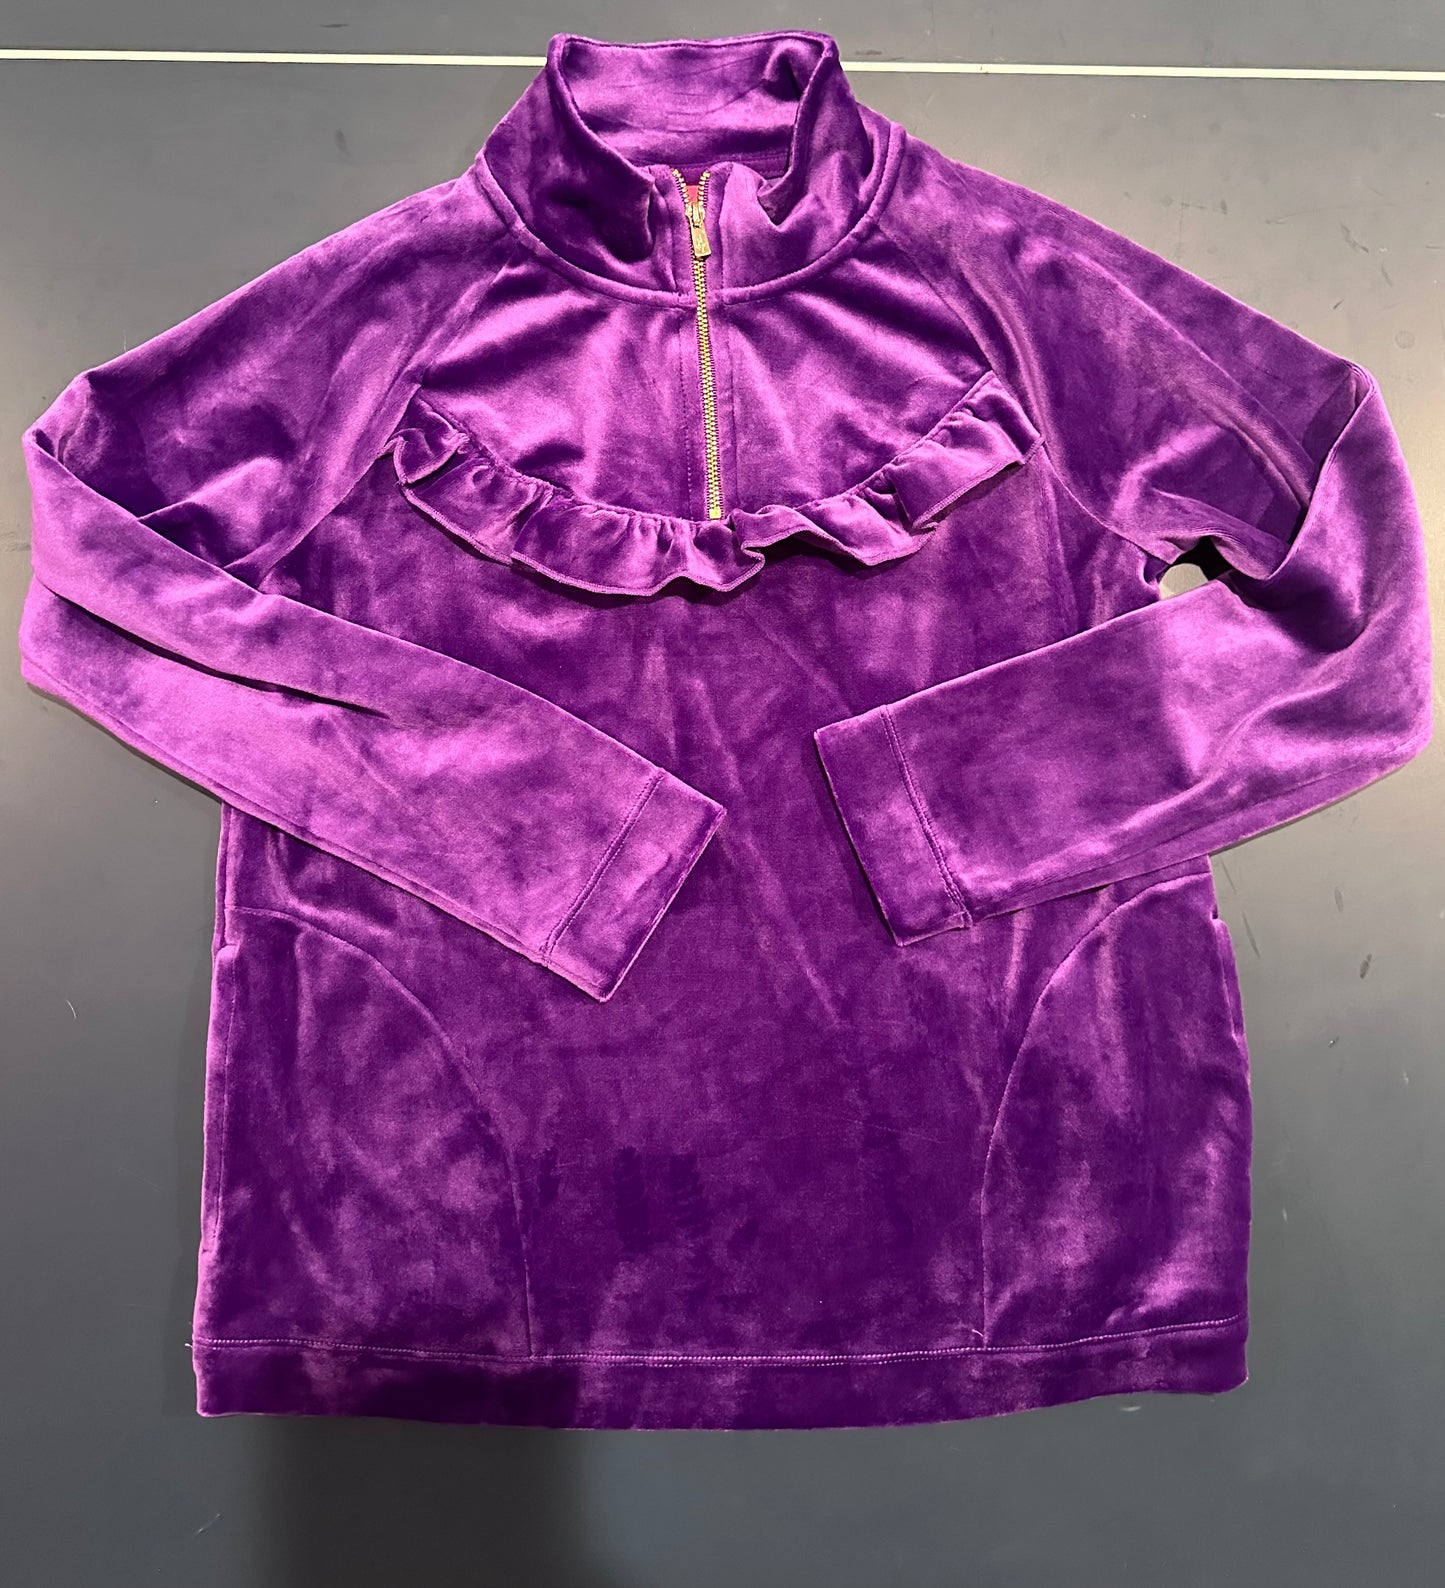 Lilly Pulitzer girls purple velour top. Girls size XL 12-14. Never dried, EUC, like new